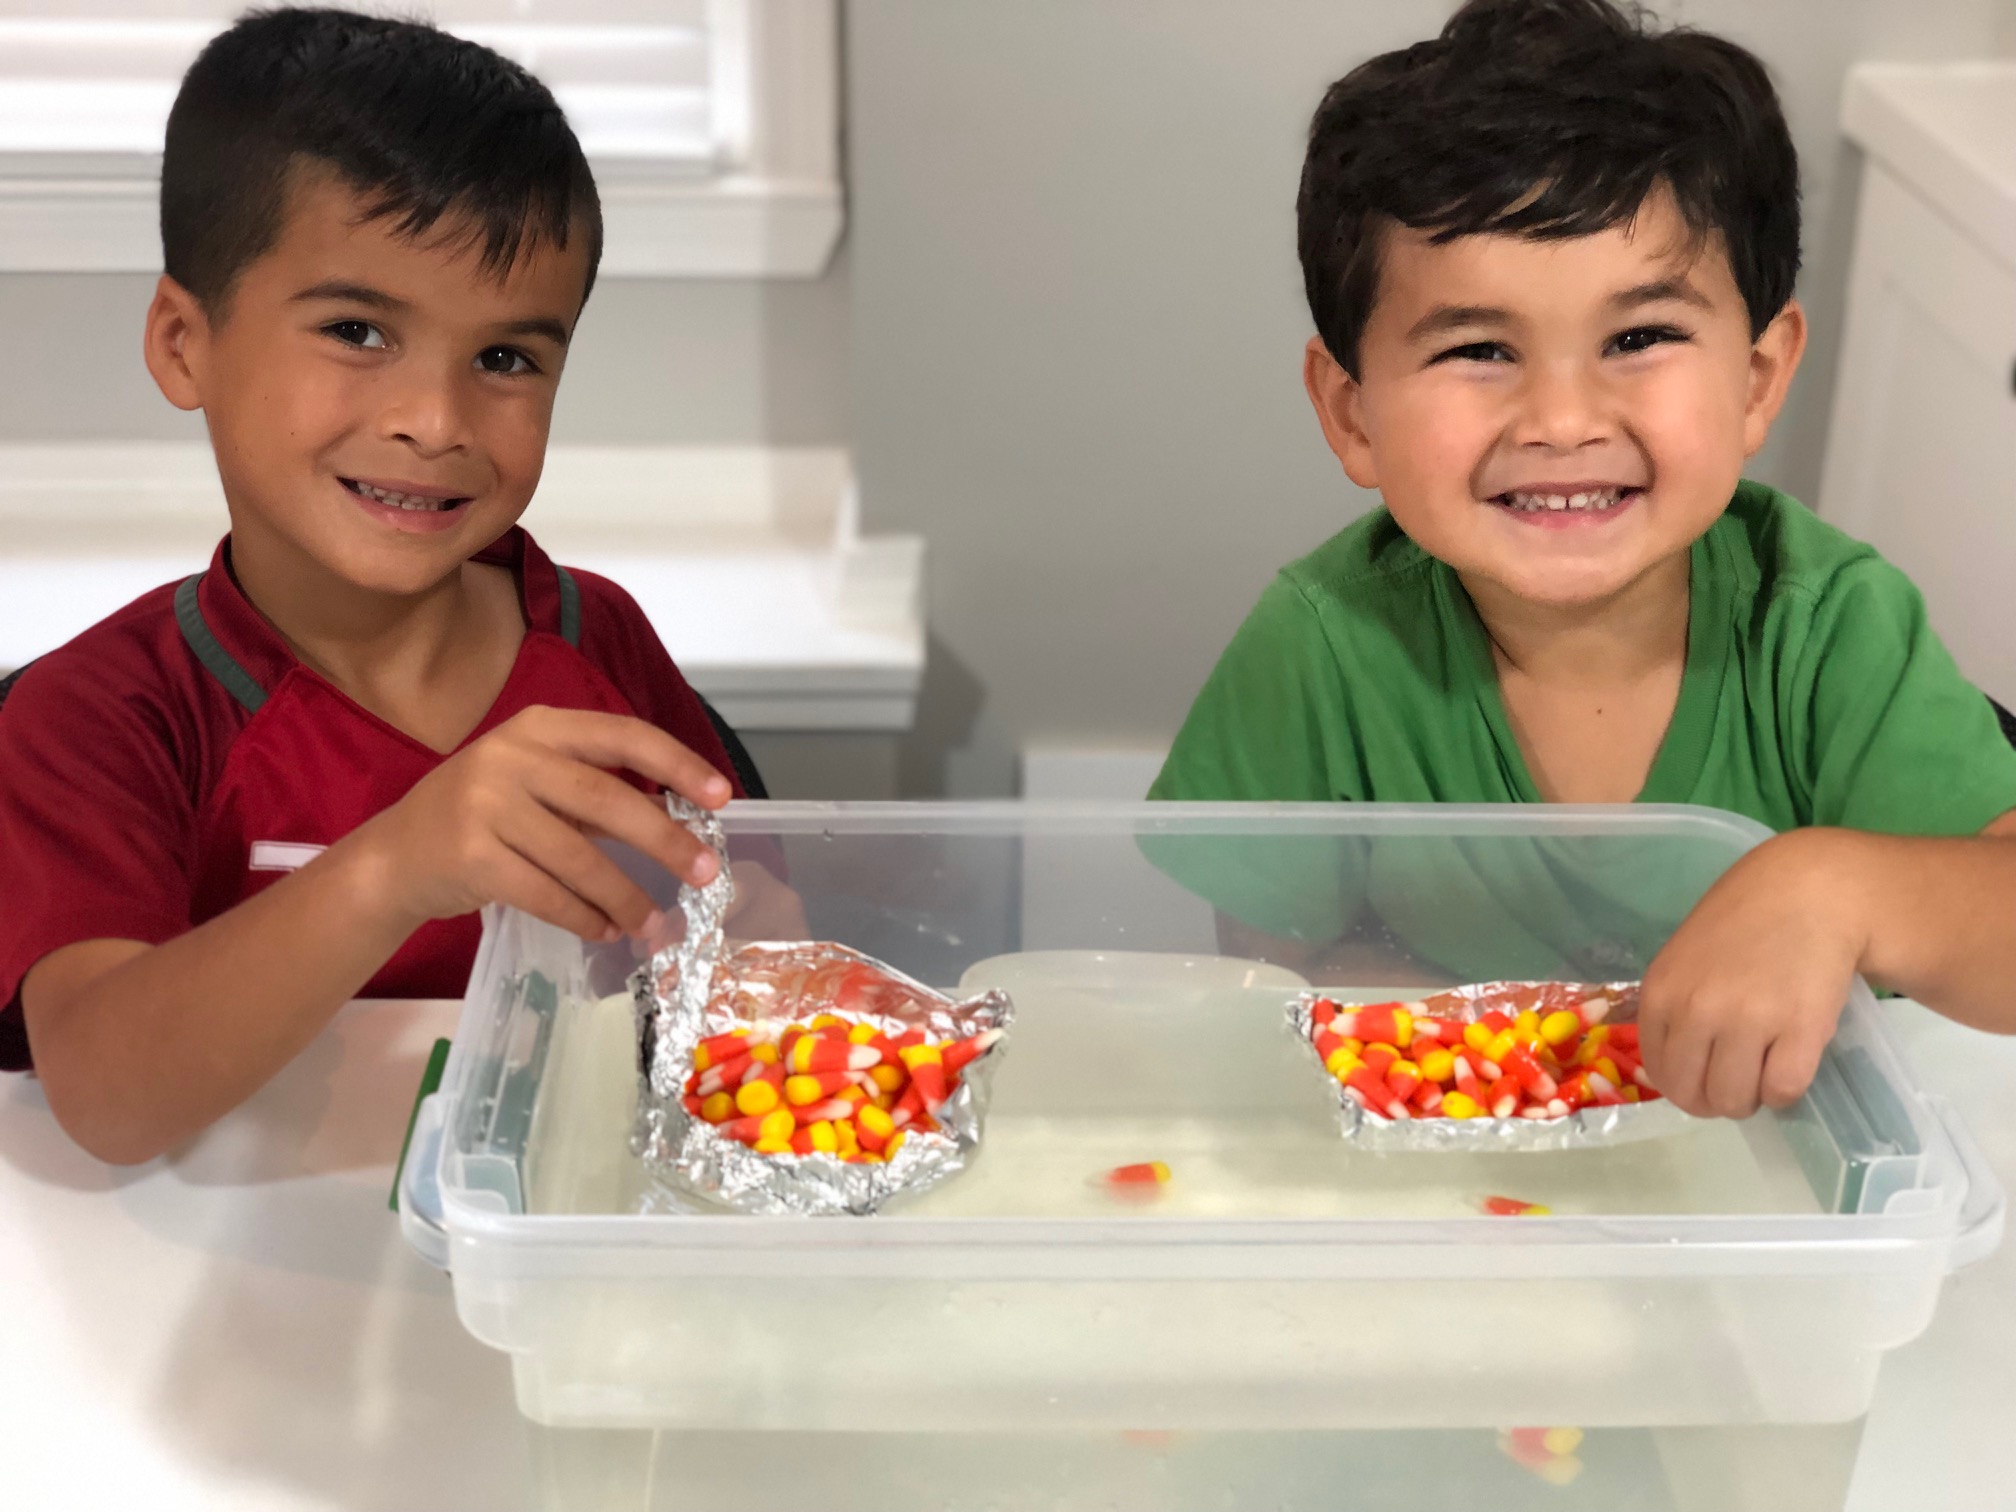 candy-corn-stem-experiment-ages-3-learn-as-you-play